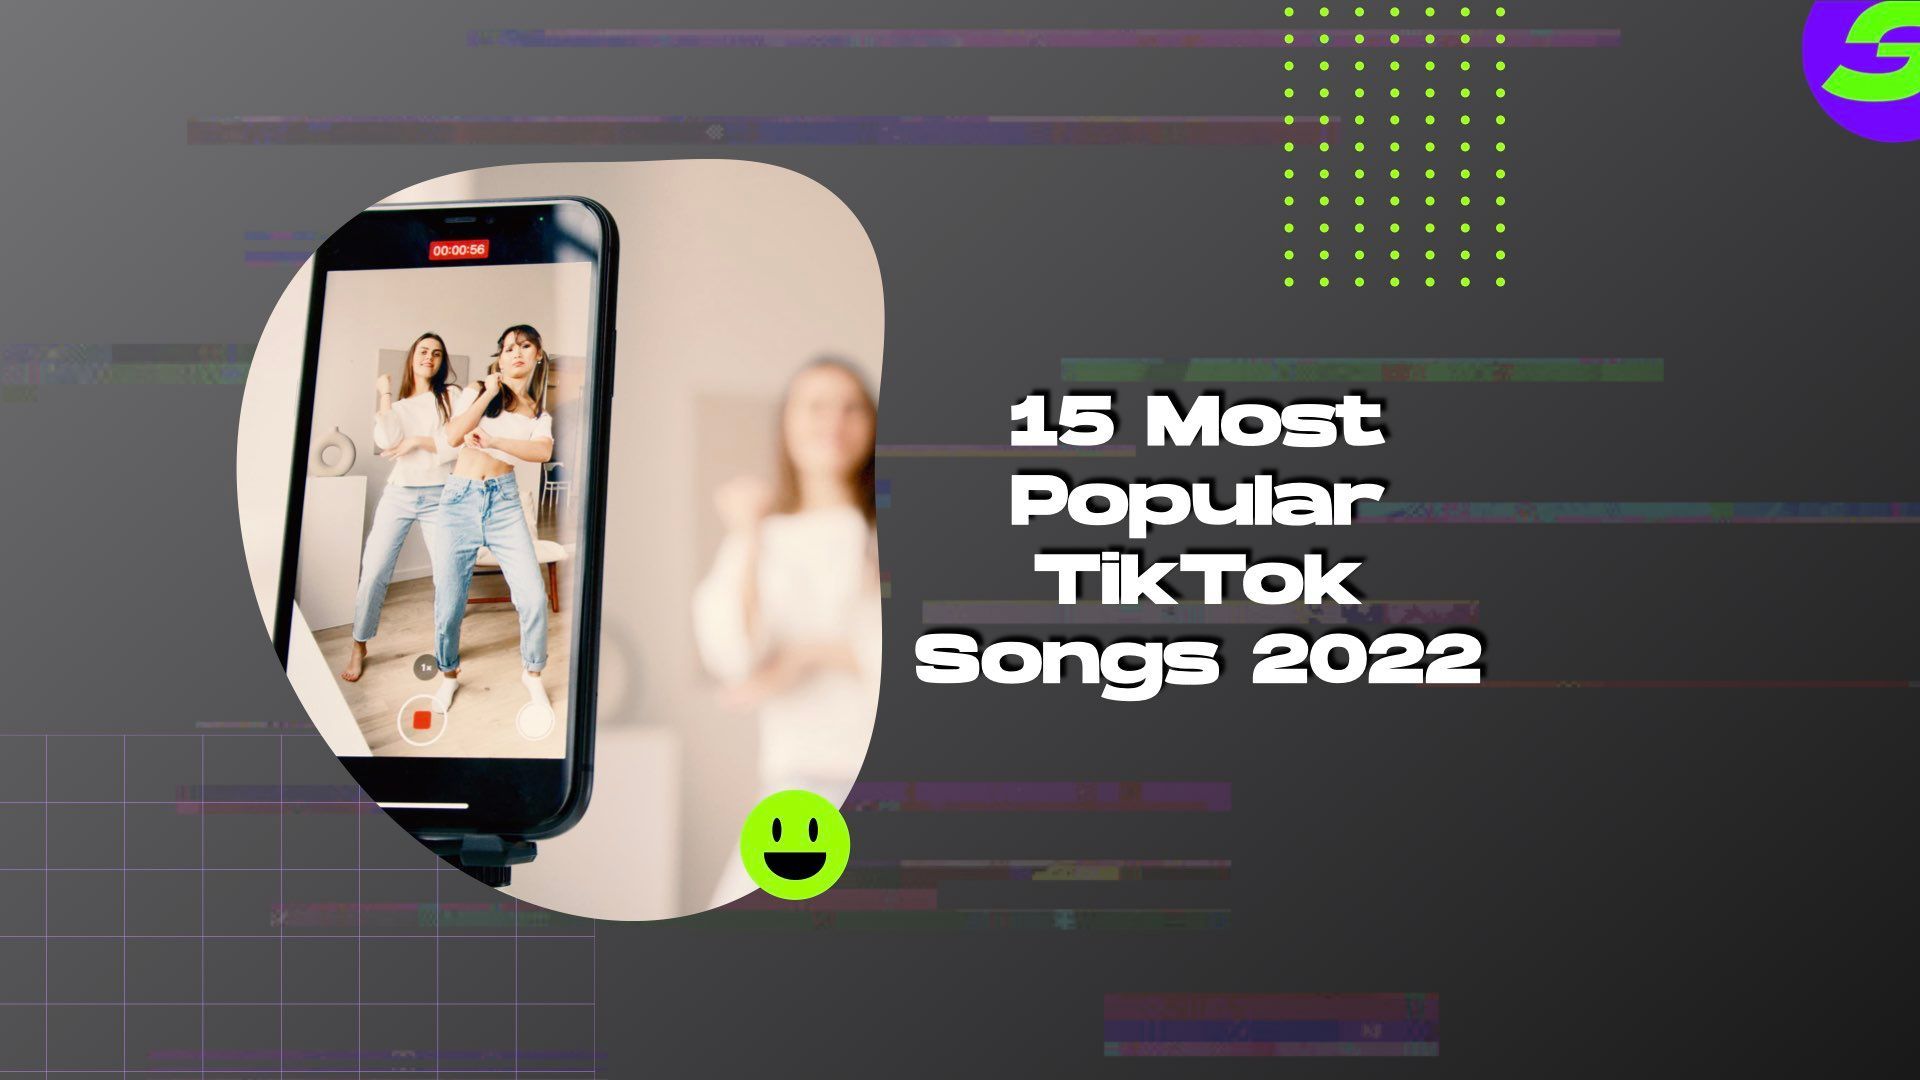 shotcut free video editor android 15 Most Popular TikTok Songs 2022